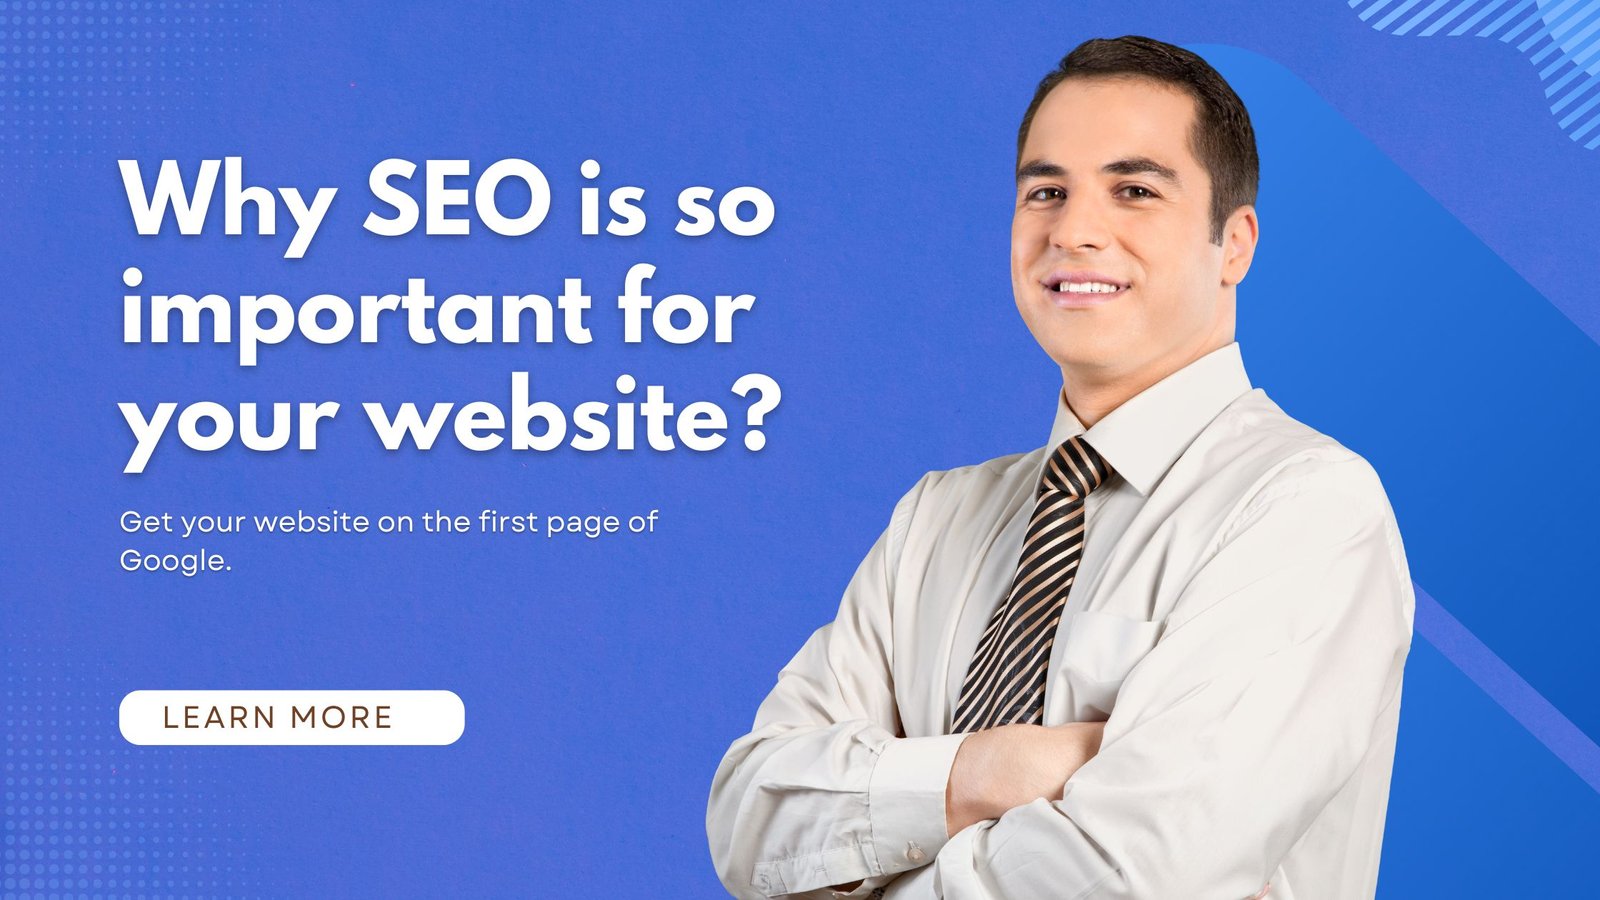 Why SEO is so important for your website